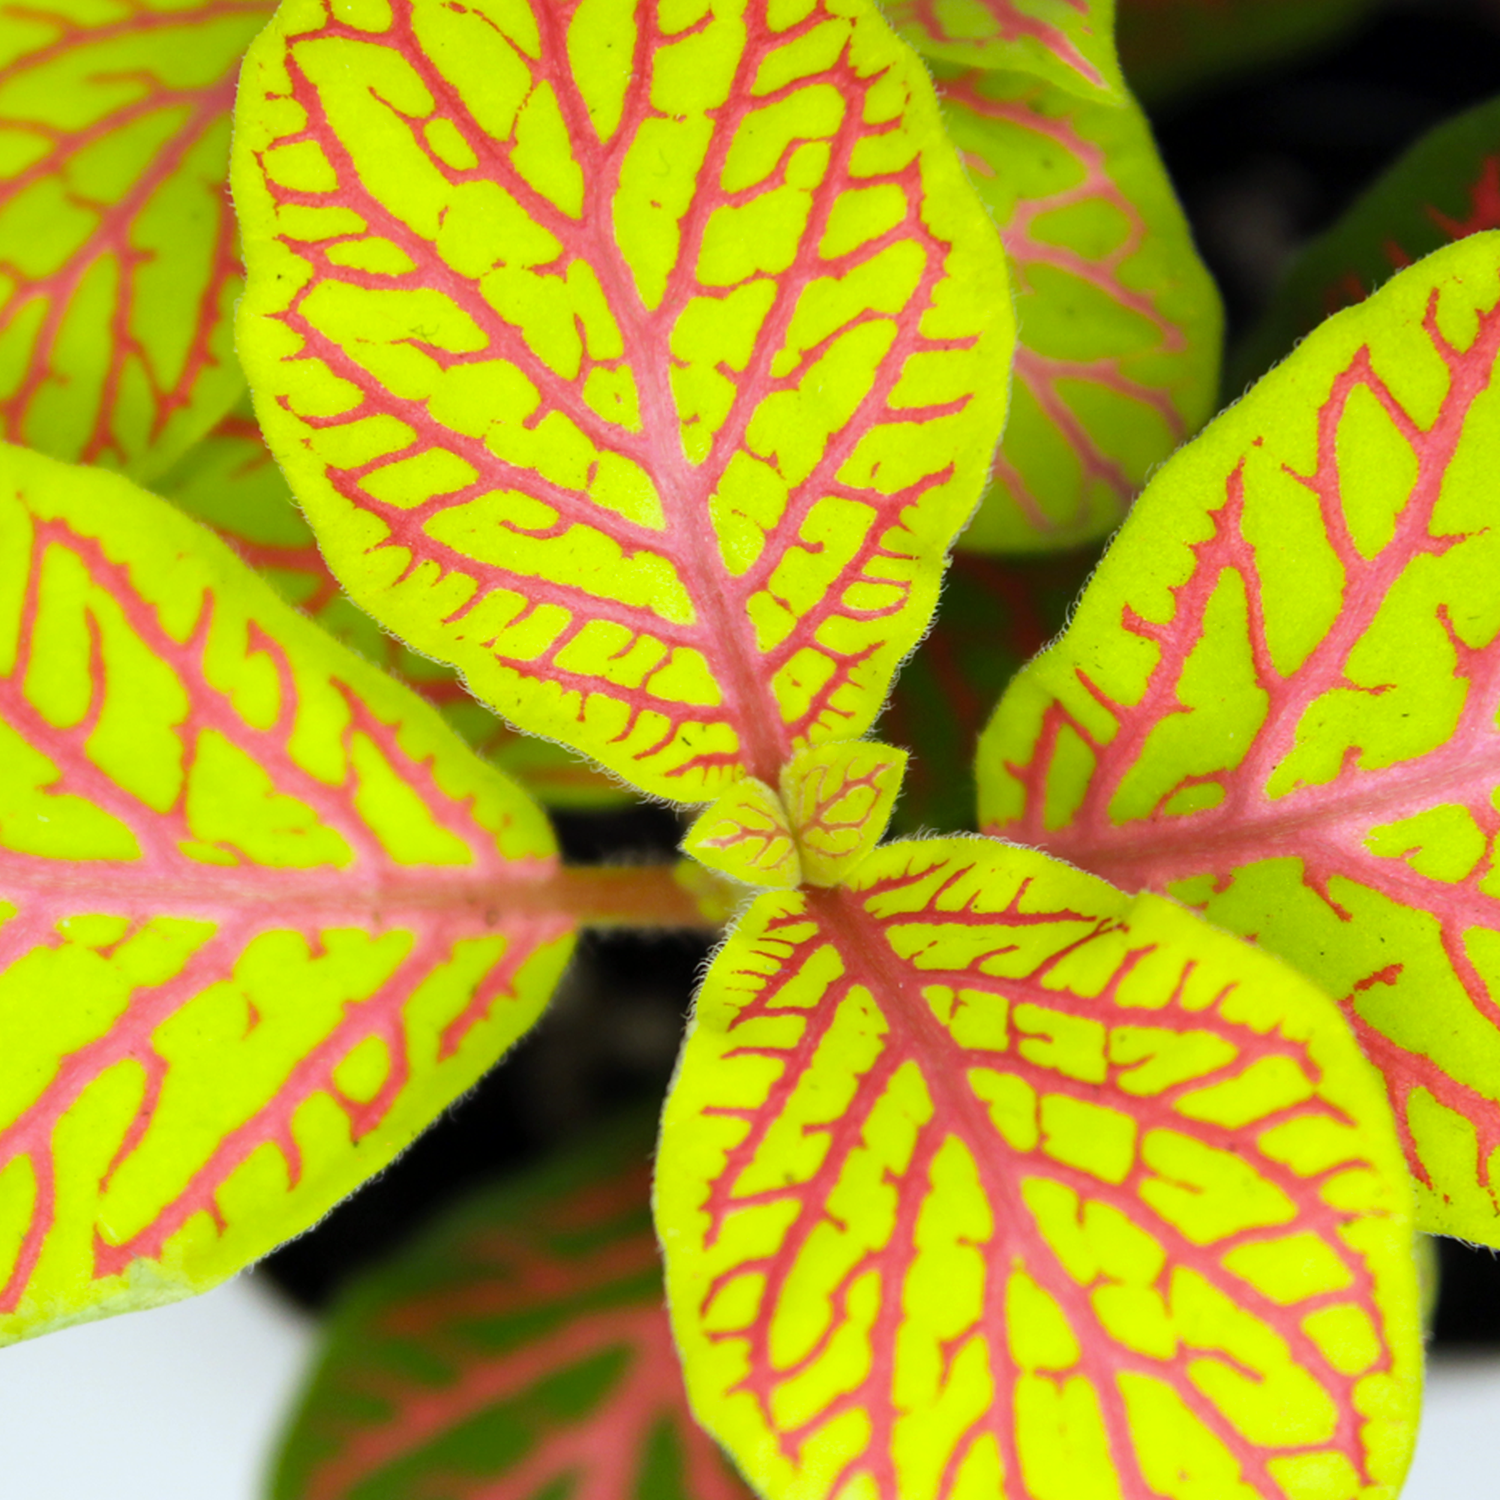 Build Your Jungle original photography, a close up aerial view of Fittonia leaves, showing the nerve-like patterns across the leaves. The primary leaf colour is lime and the plant's veins are bright fuchsia. 